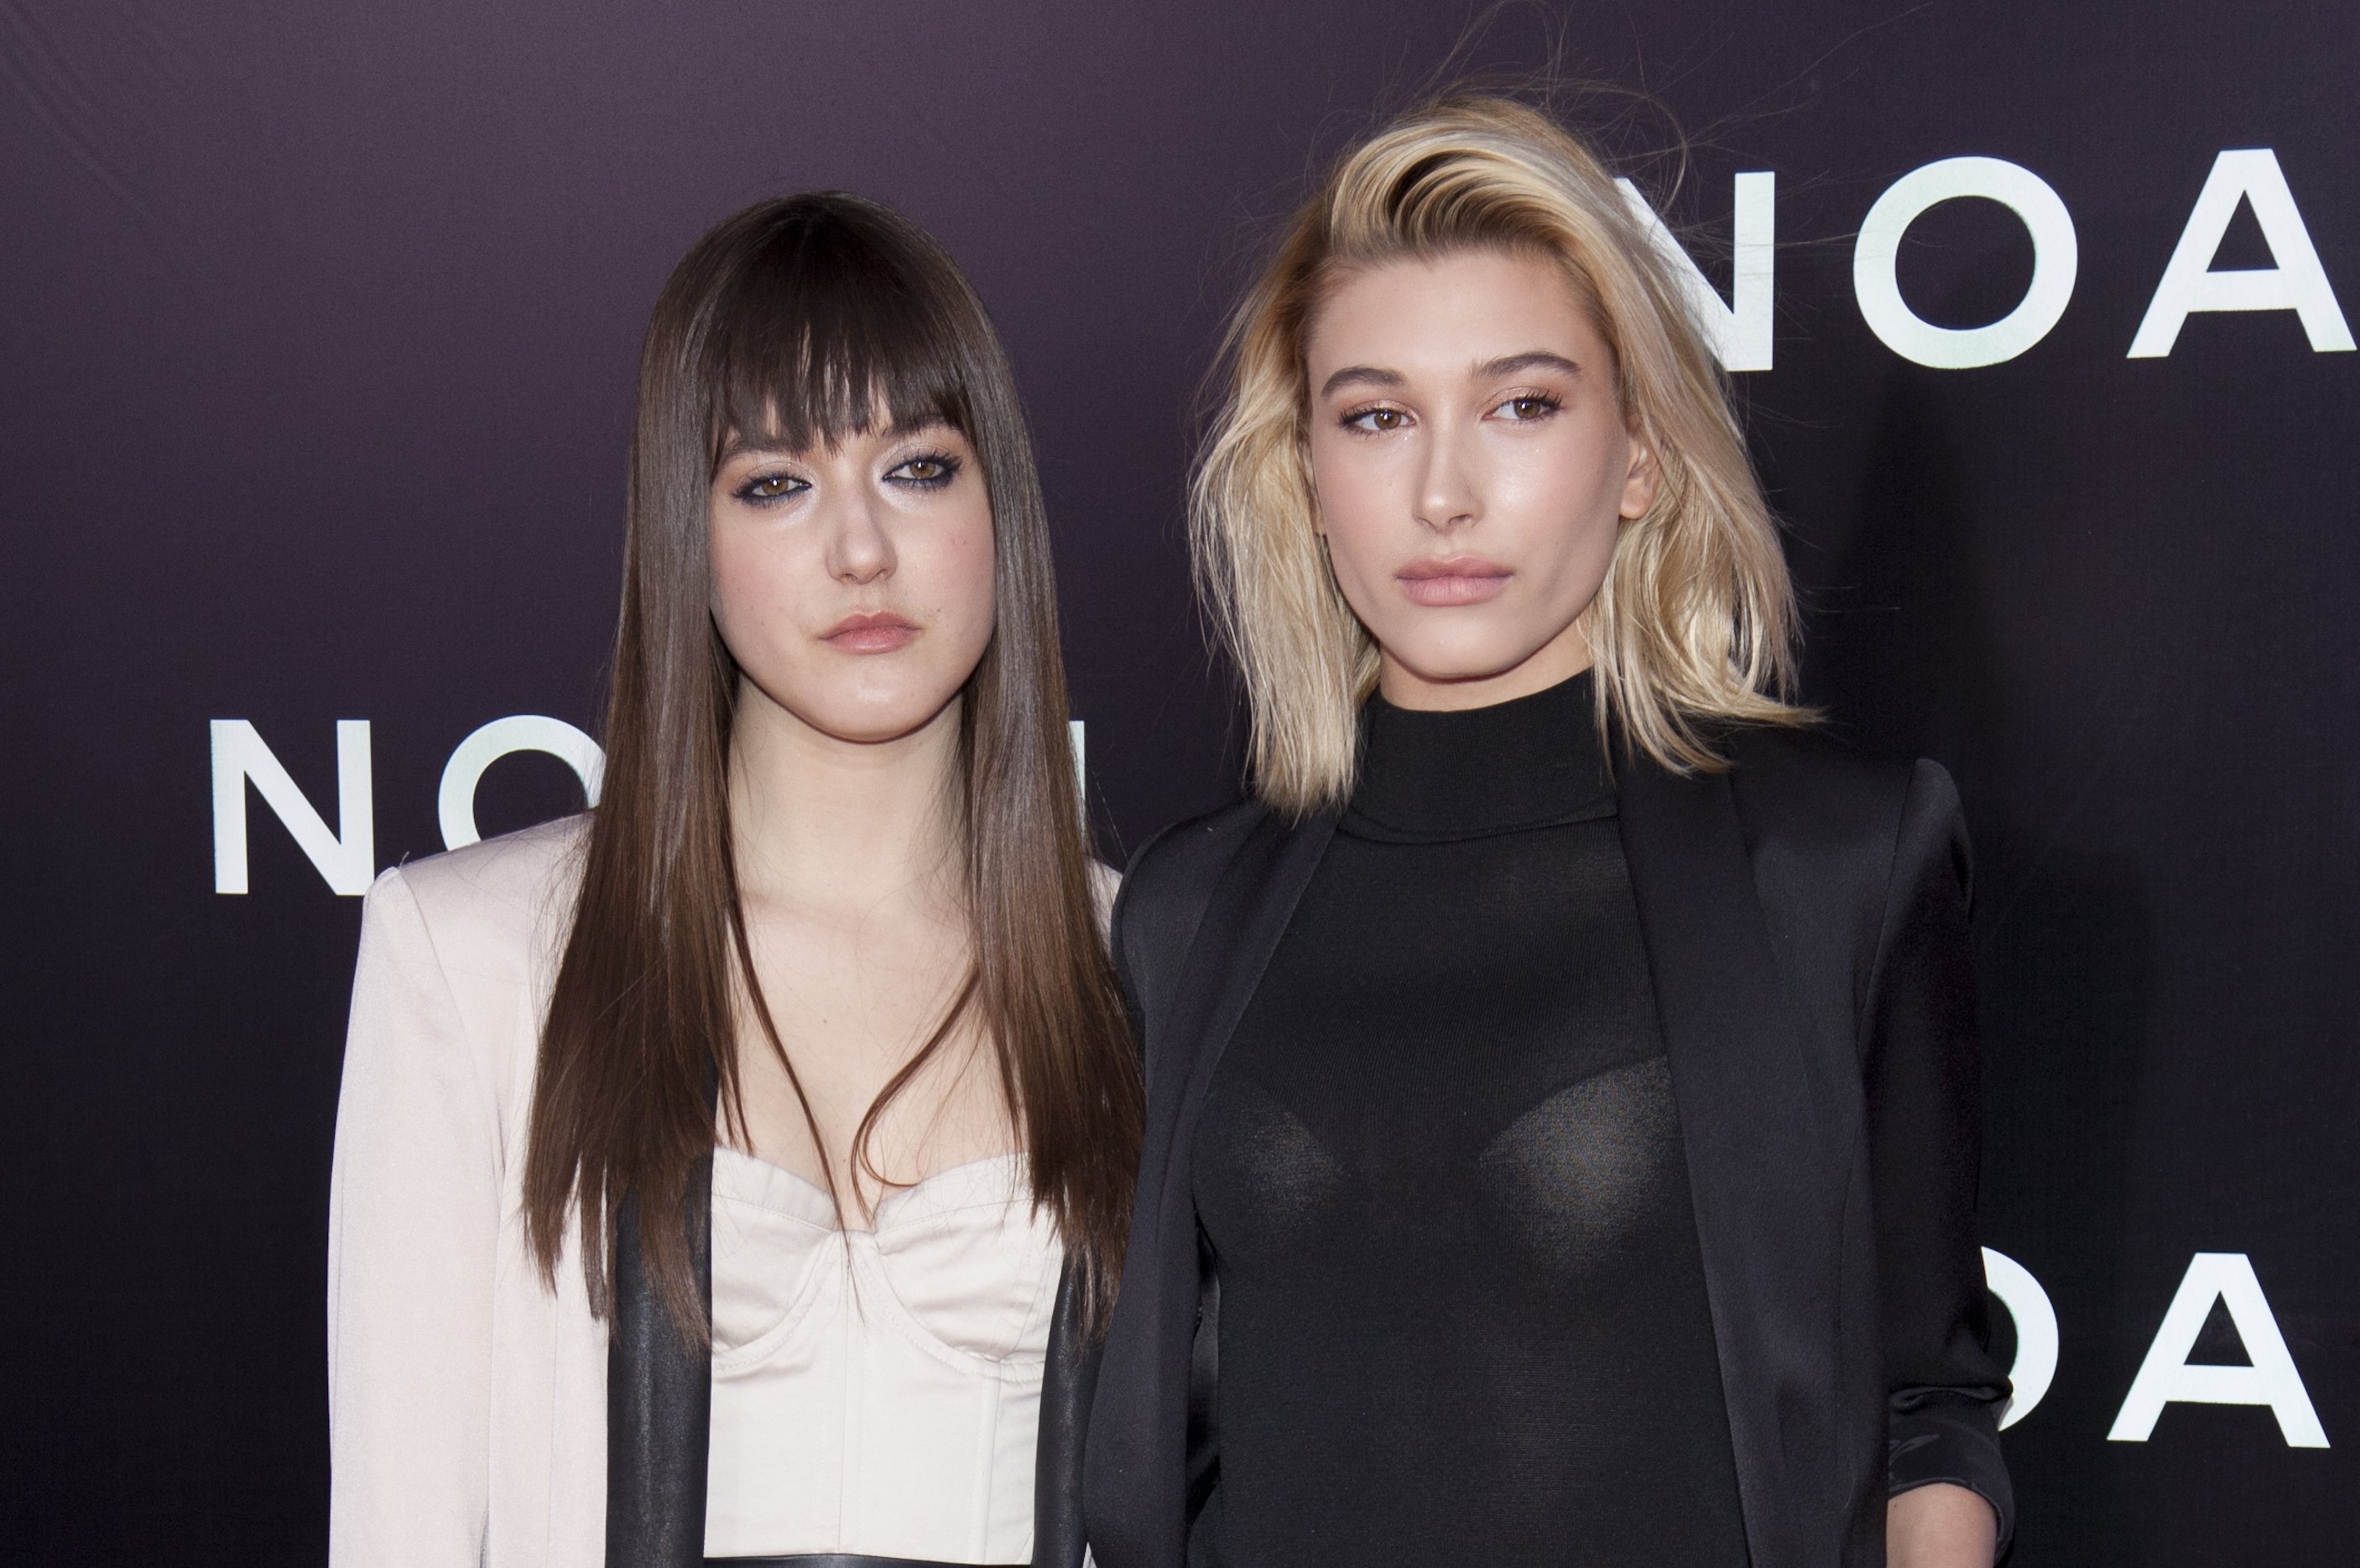 Alaia Baldwin and Hailey Baldwin at the New York premiere of "Noah" on March 26, 2014 | Source: Getty Images